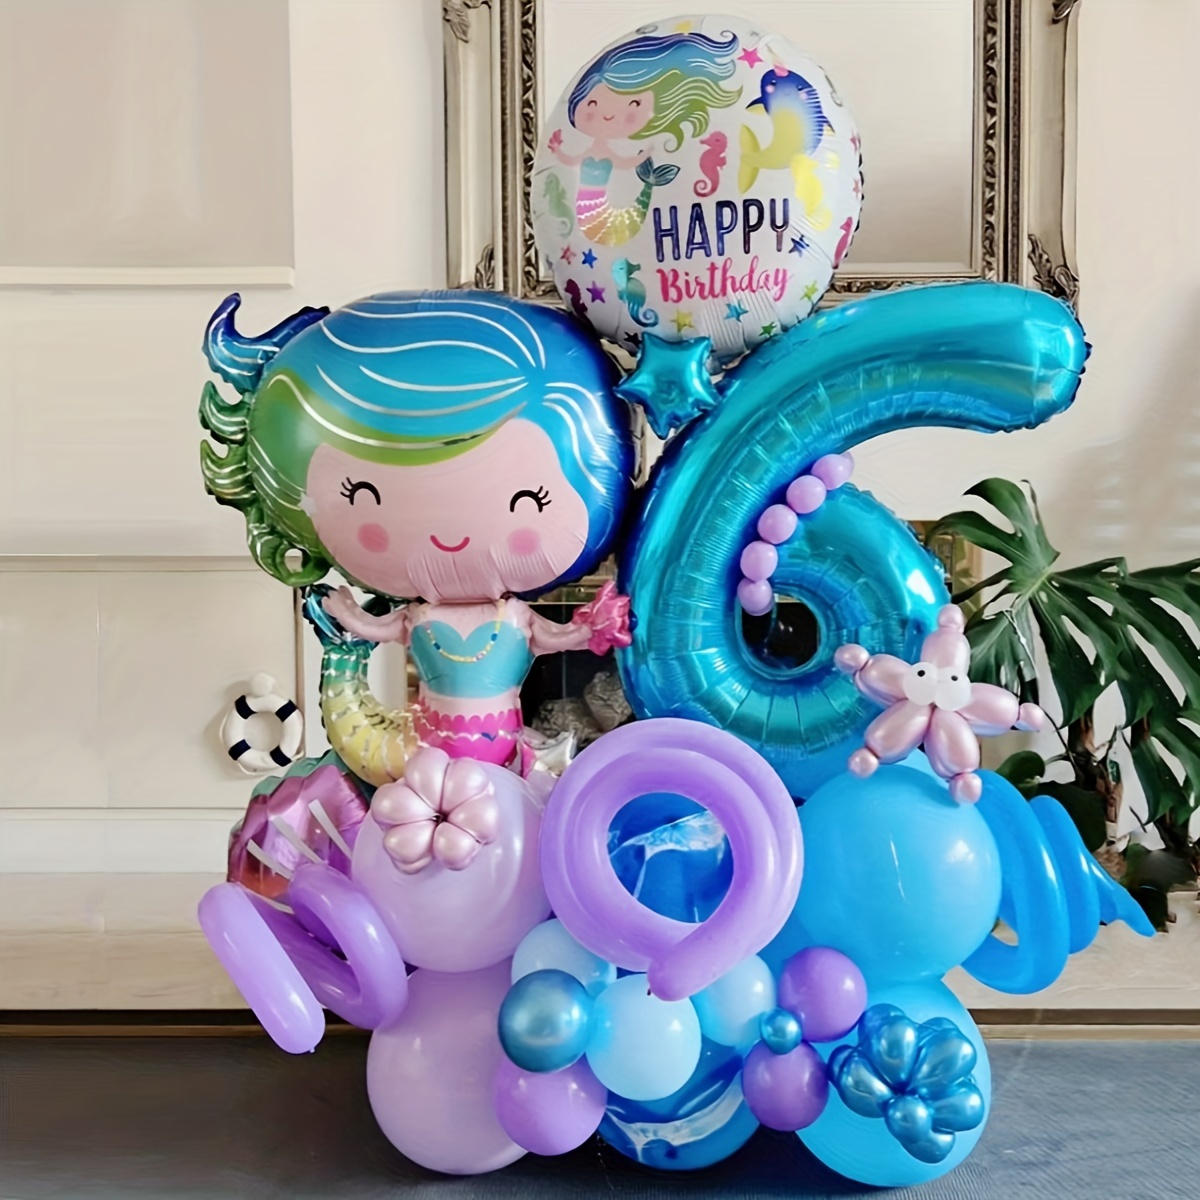 YQTAT Mermaid birthday party decorations for girl ocean mermaid theme  birthday party balloons supplies for kids teens Mermaid decorations